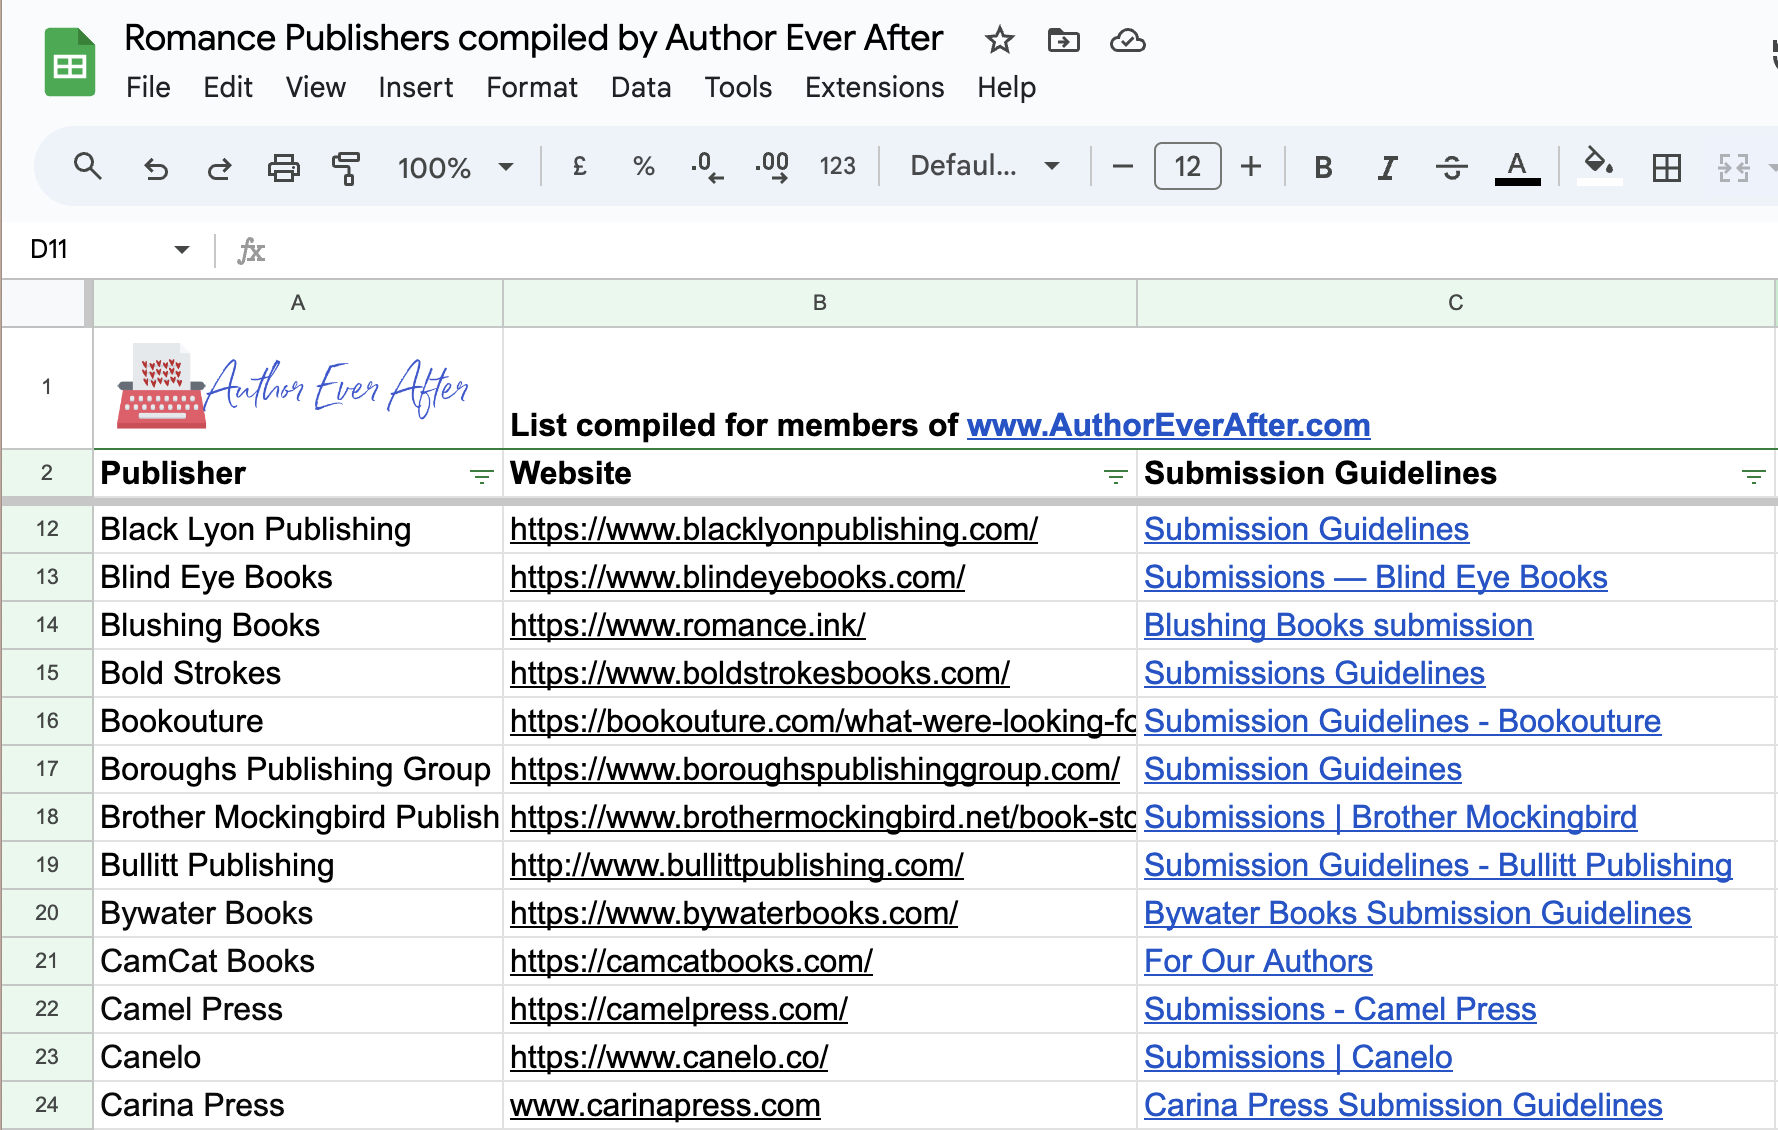 screenshot of a spreadsheet with 77 romance publishers listed